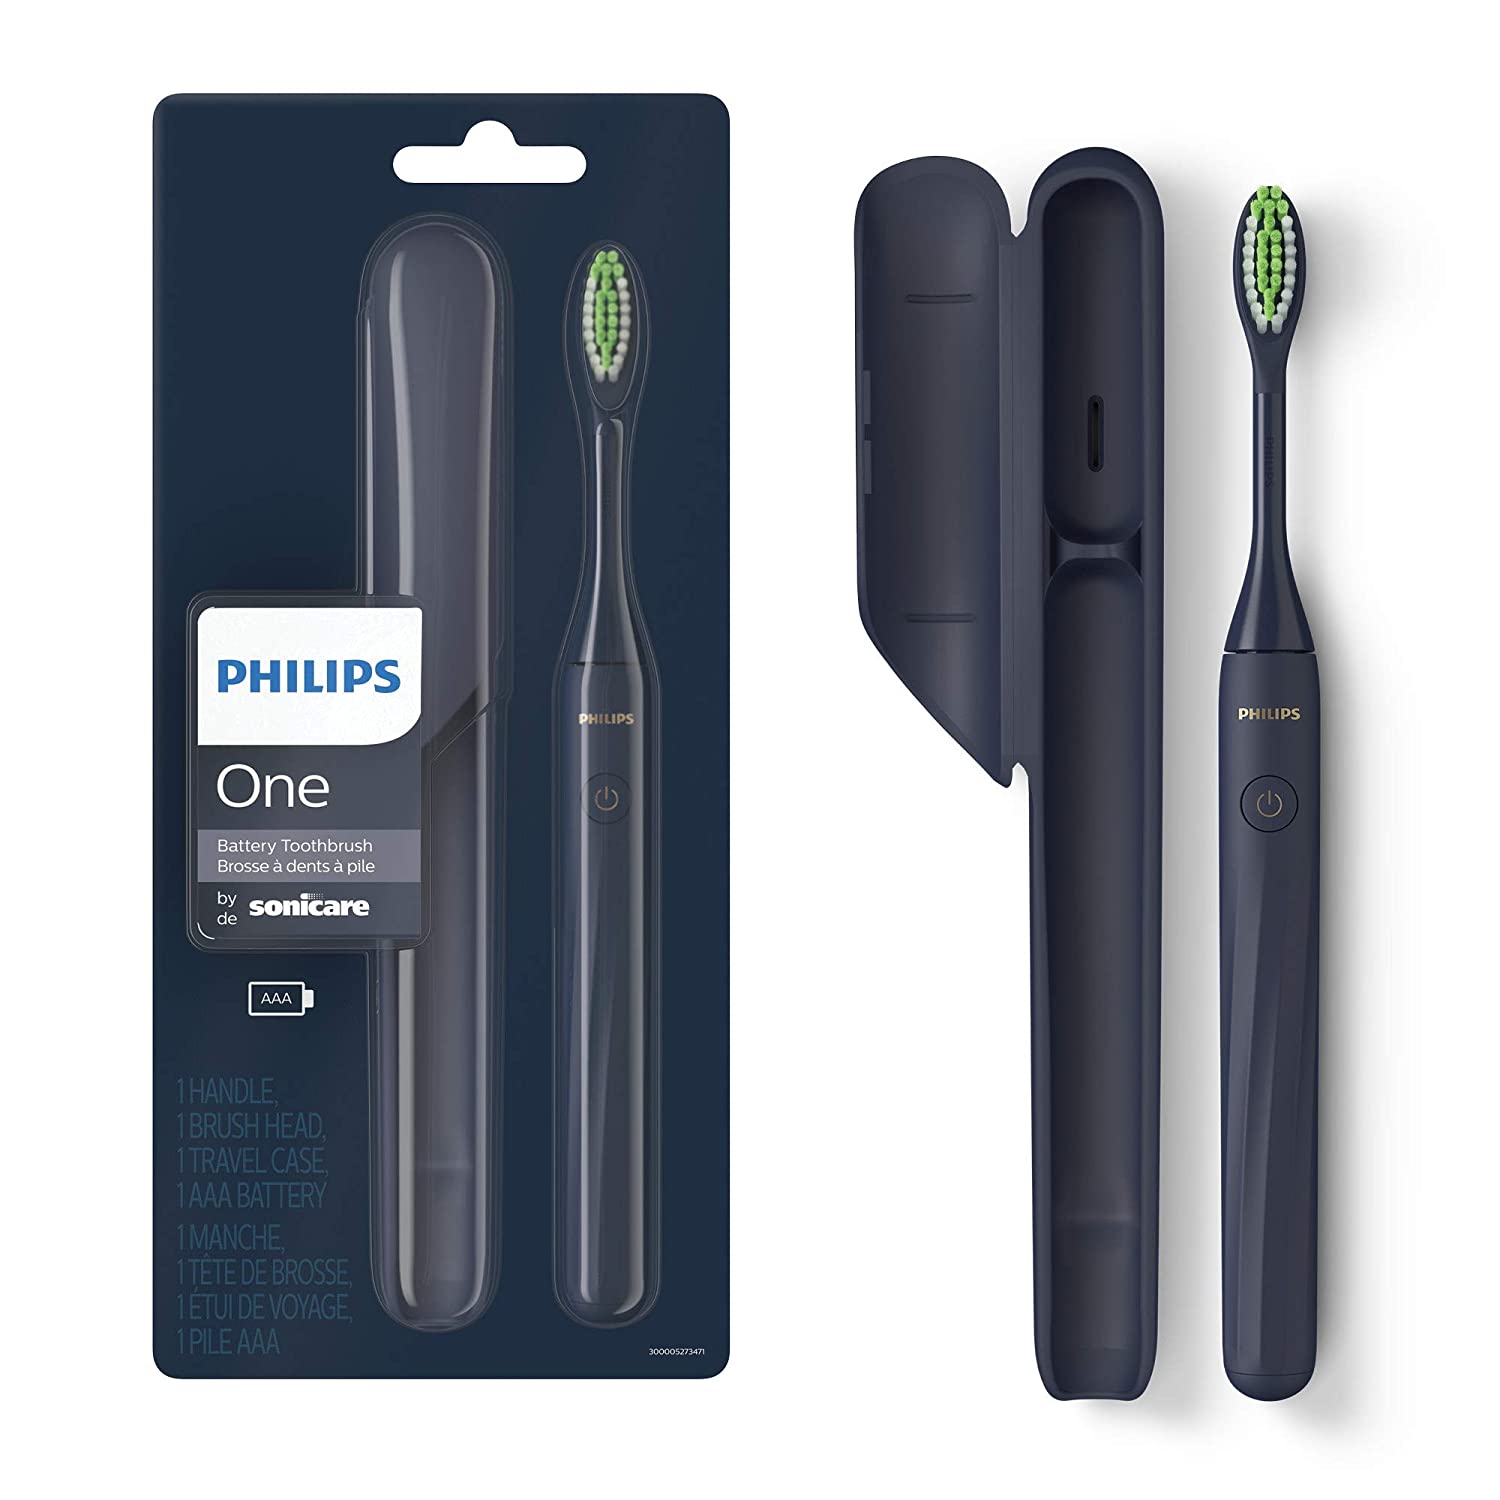 Citra Produk Philips Sonicare One